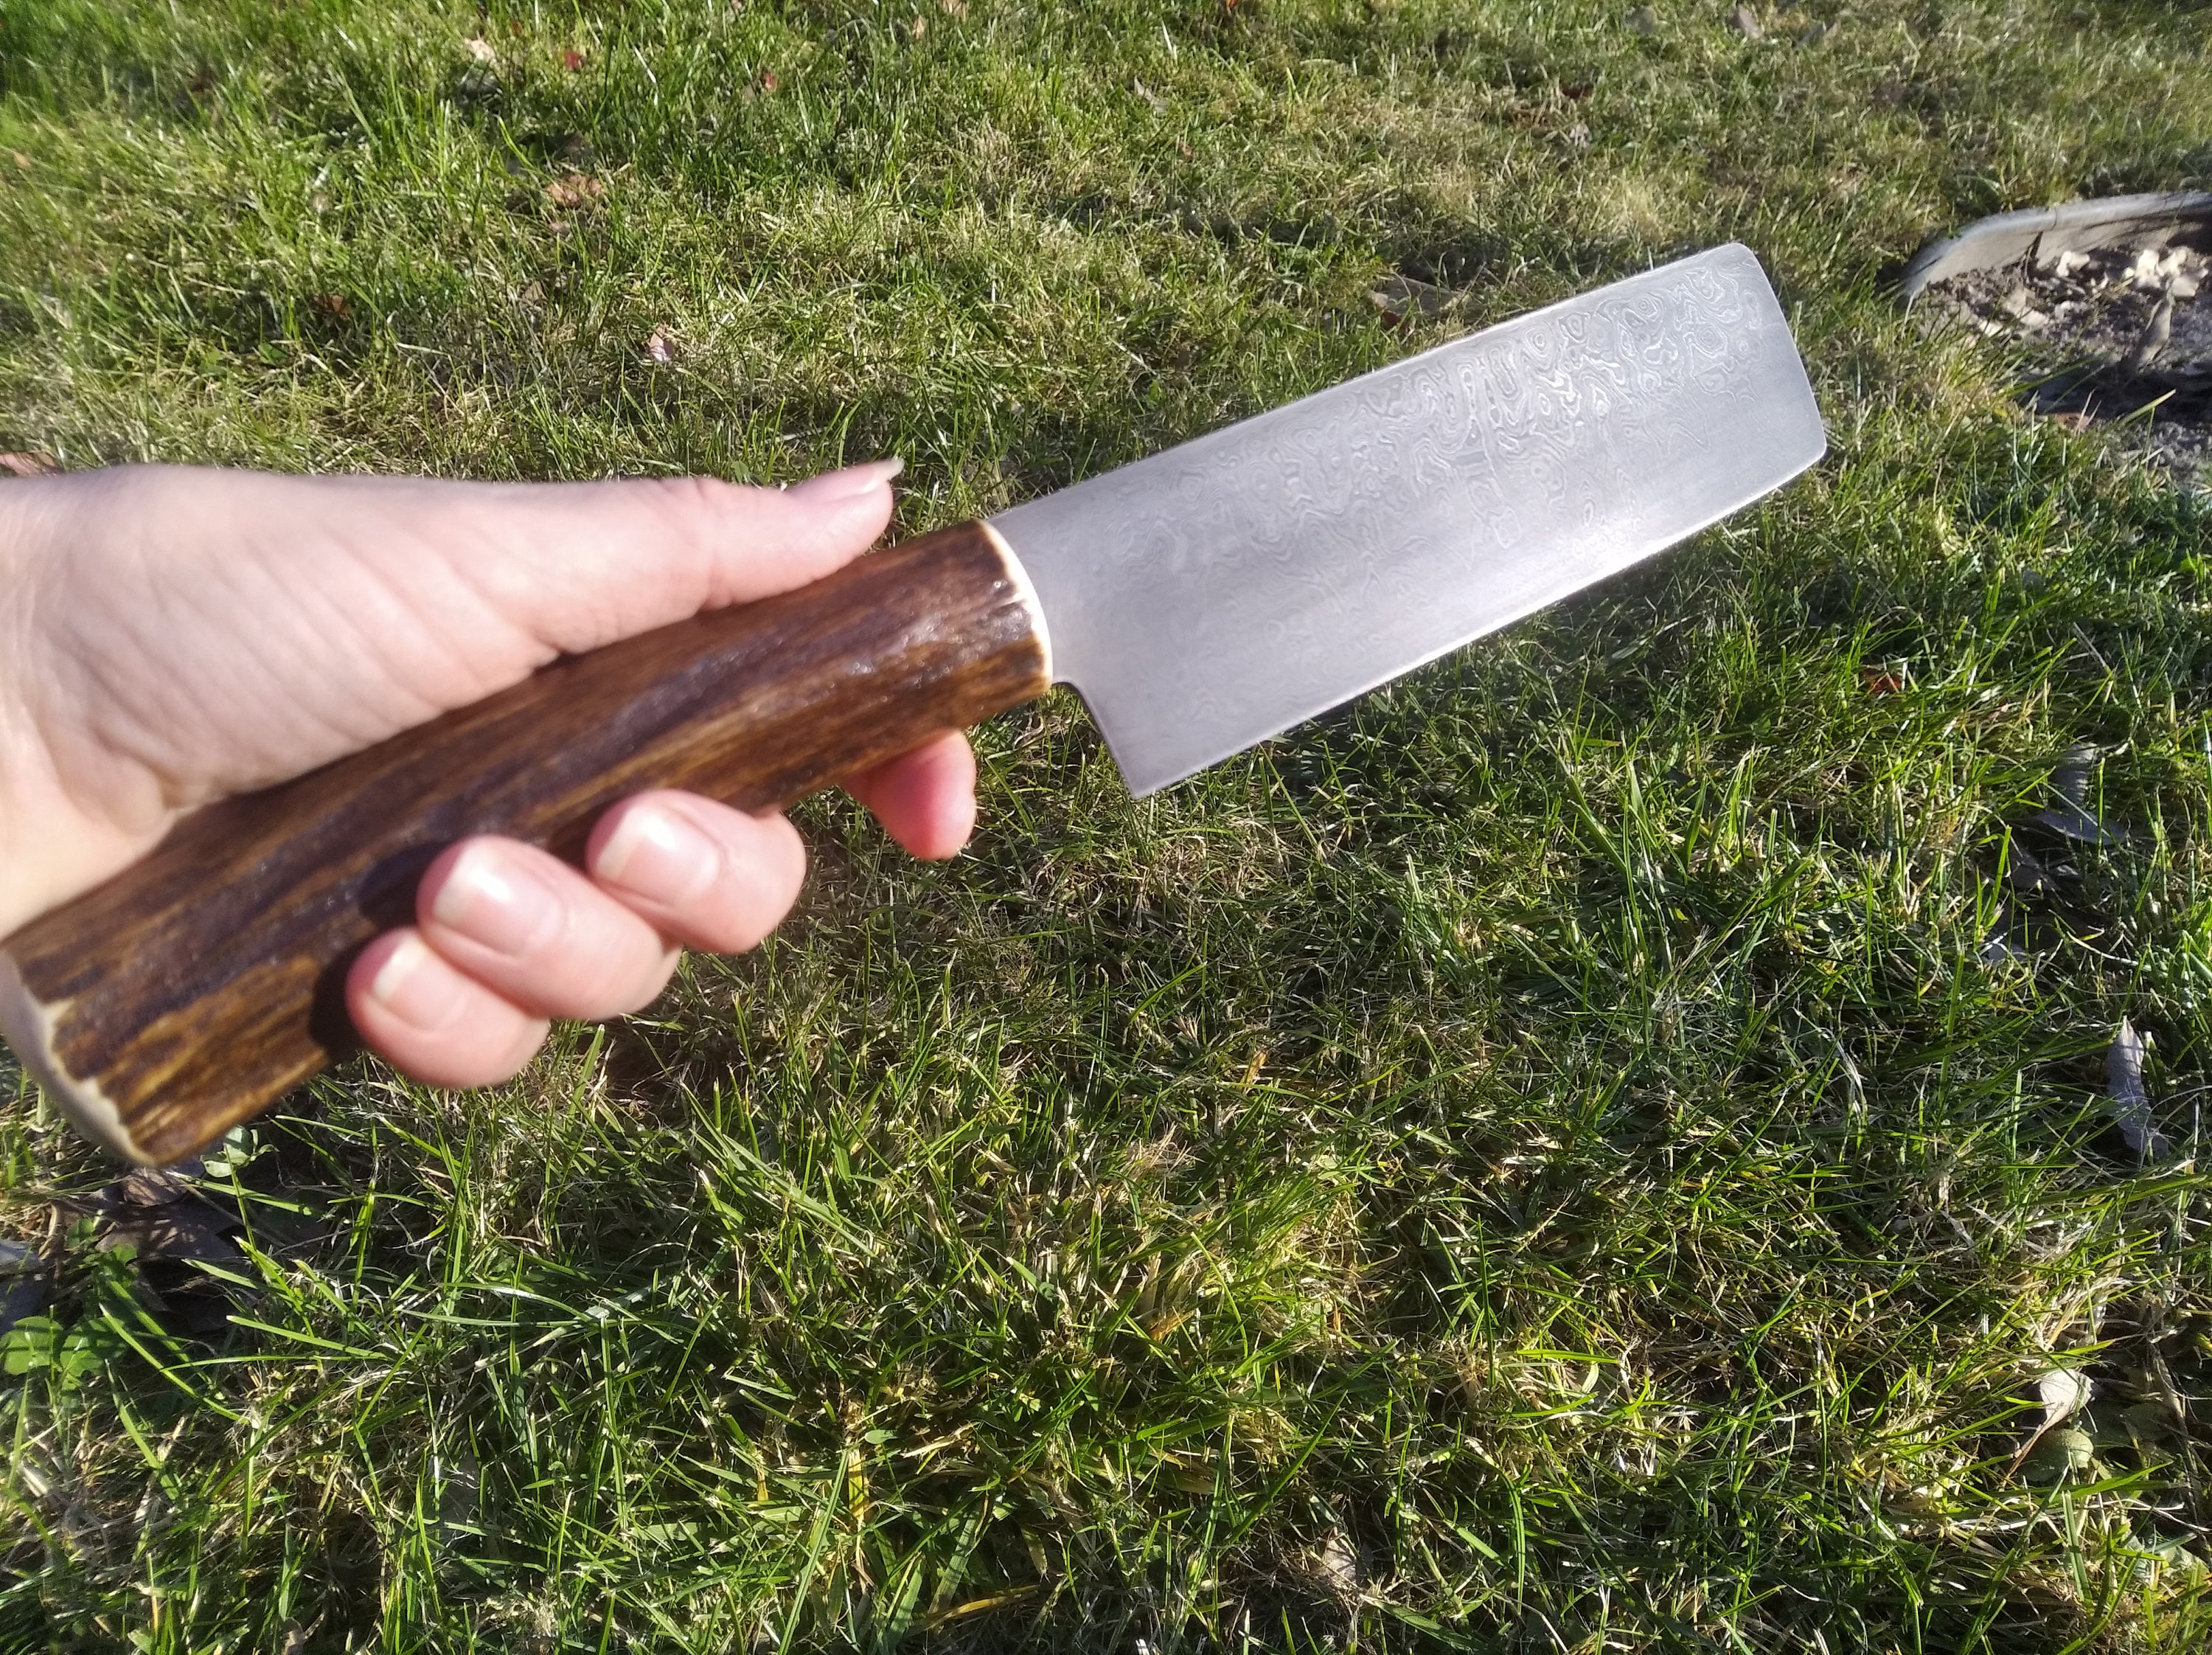 Hand-Forged Nakiri knife with Damascus blade. Cleaver Style